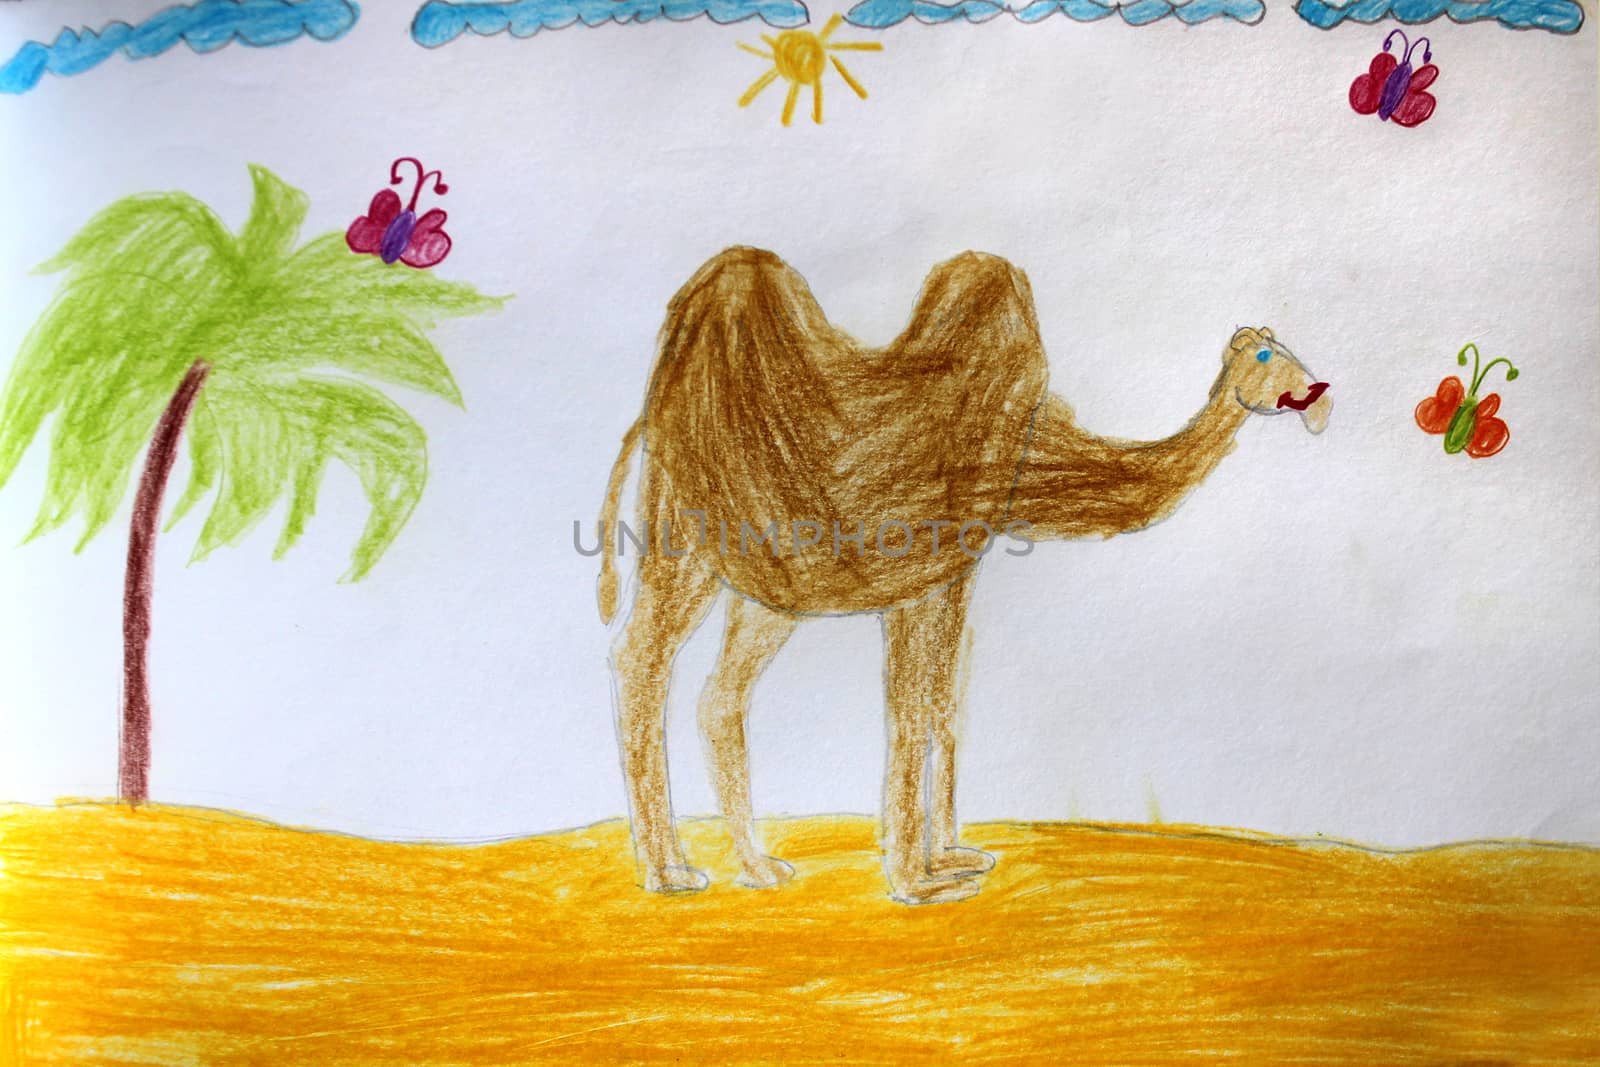 Children's drawing of camel by alexmak